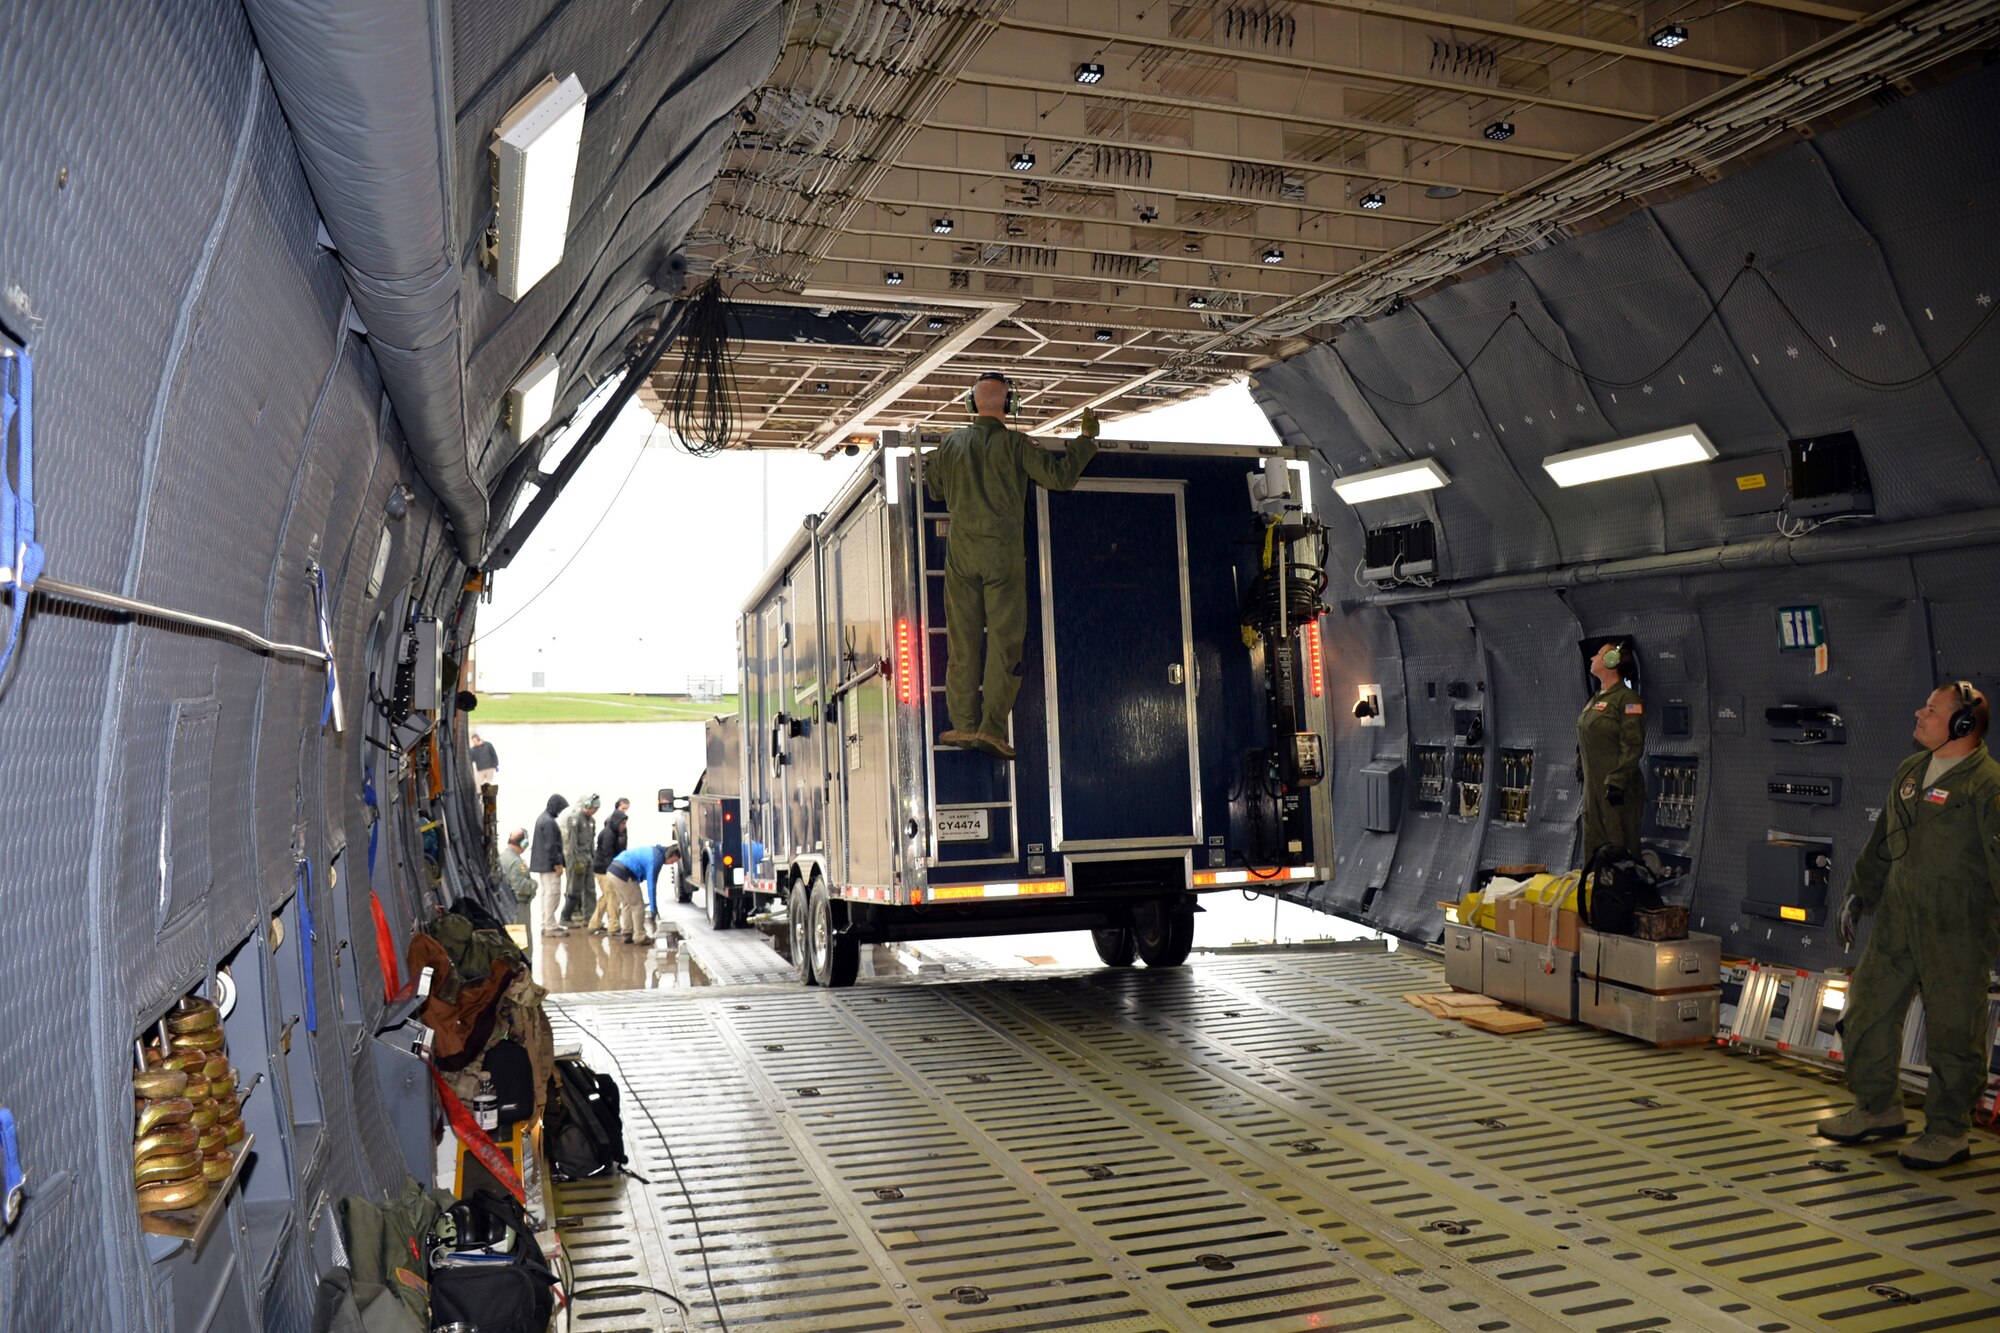 Members of the Texas National Guard 6th Weapons of Mass Destruction Civil Support Team and the 433rd Airlift Wing stop to check clearance while guiding a vehicle into a C-5M Super Galaxy Oct. 24, 2018 at Joint Base San Antonio-Lackland, Texas.